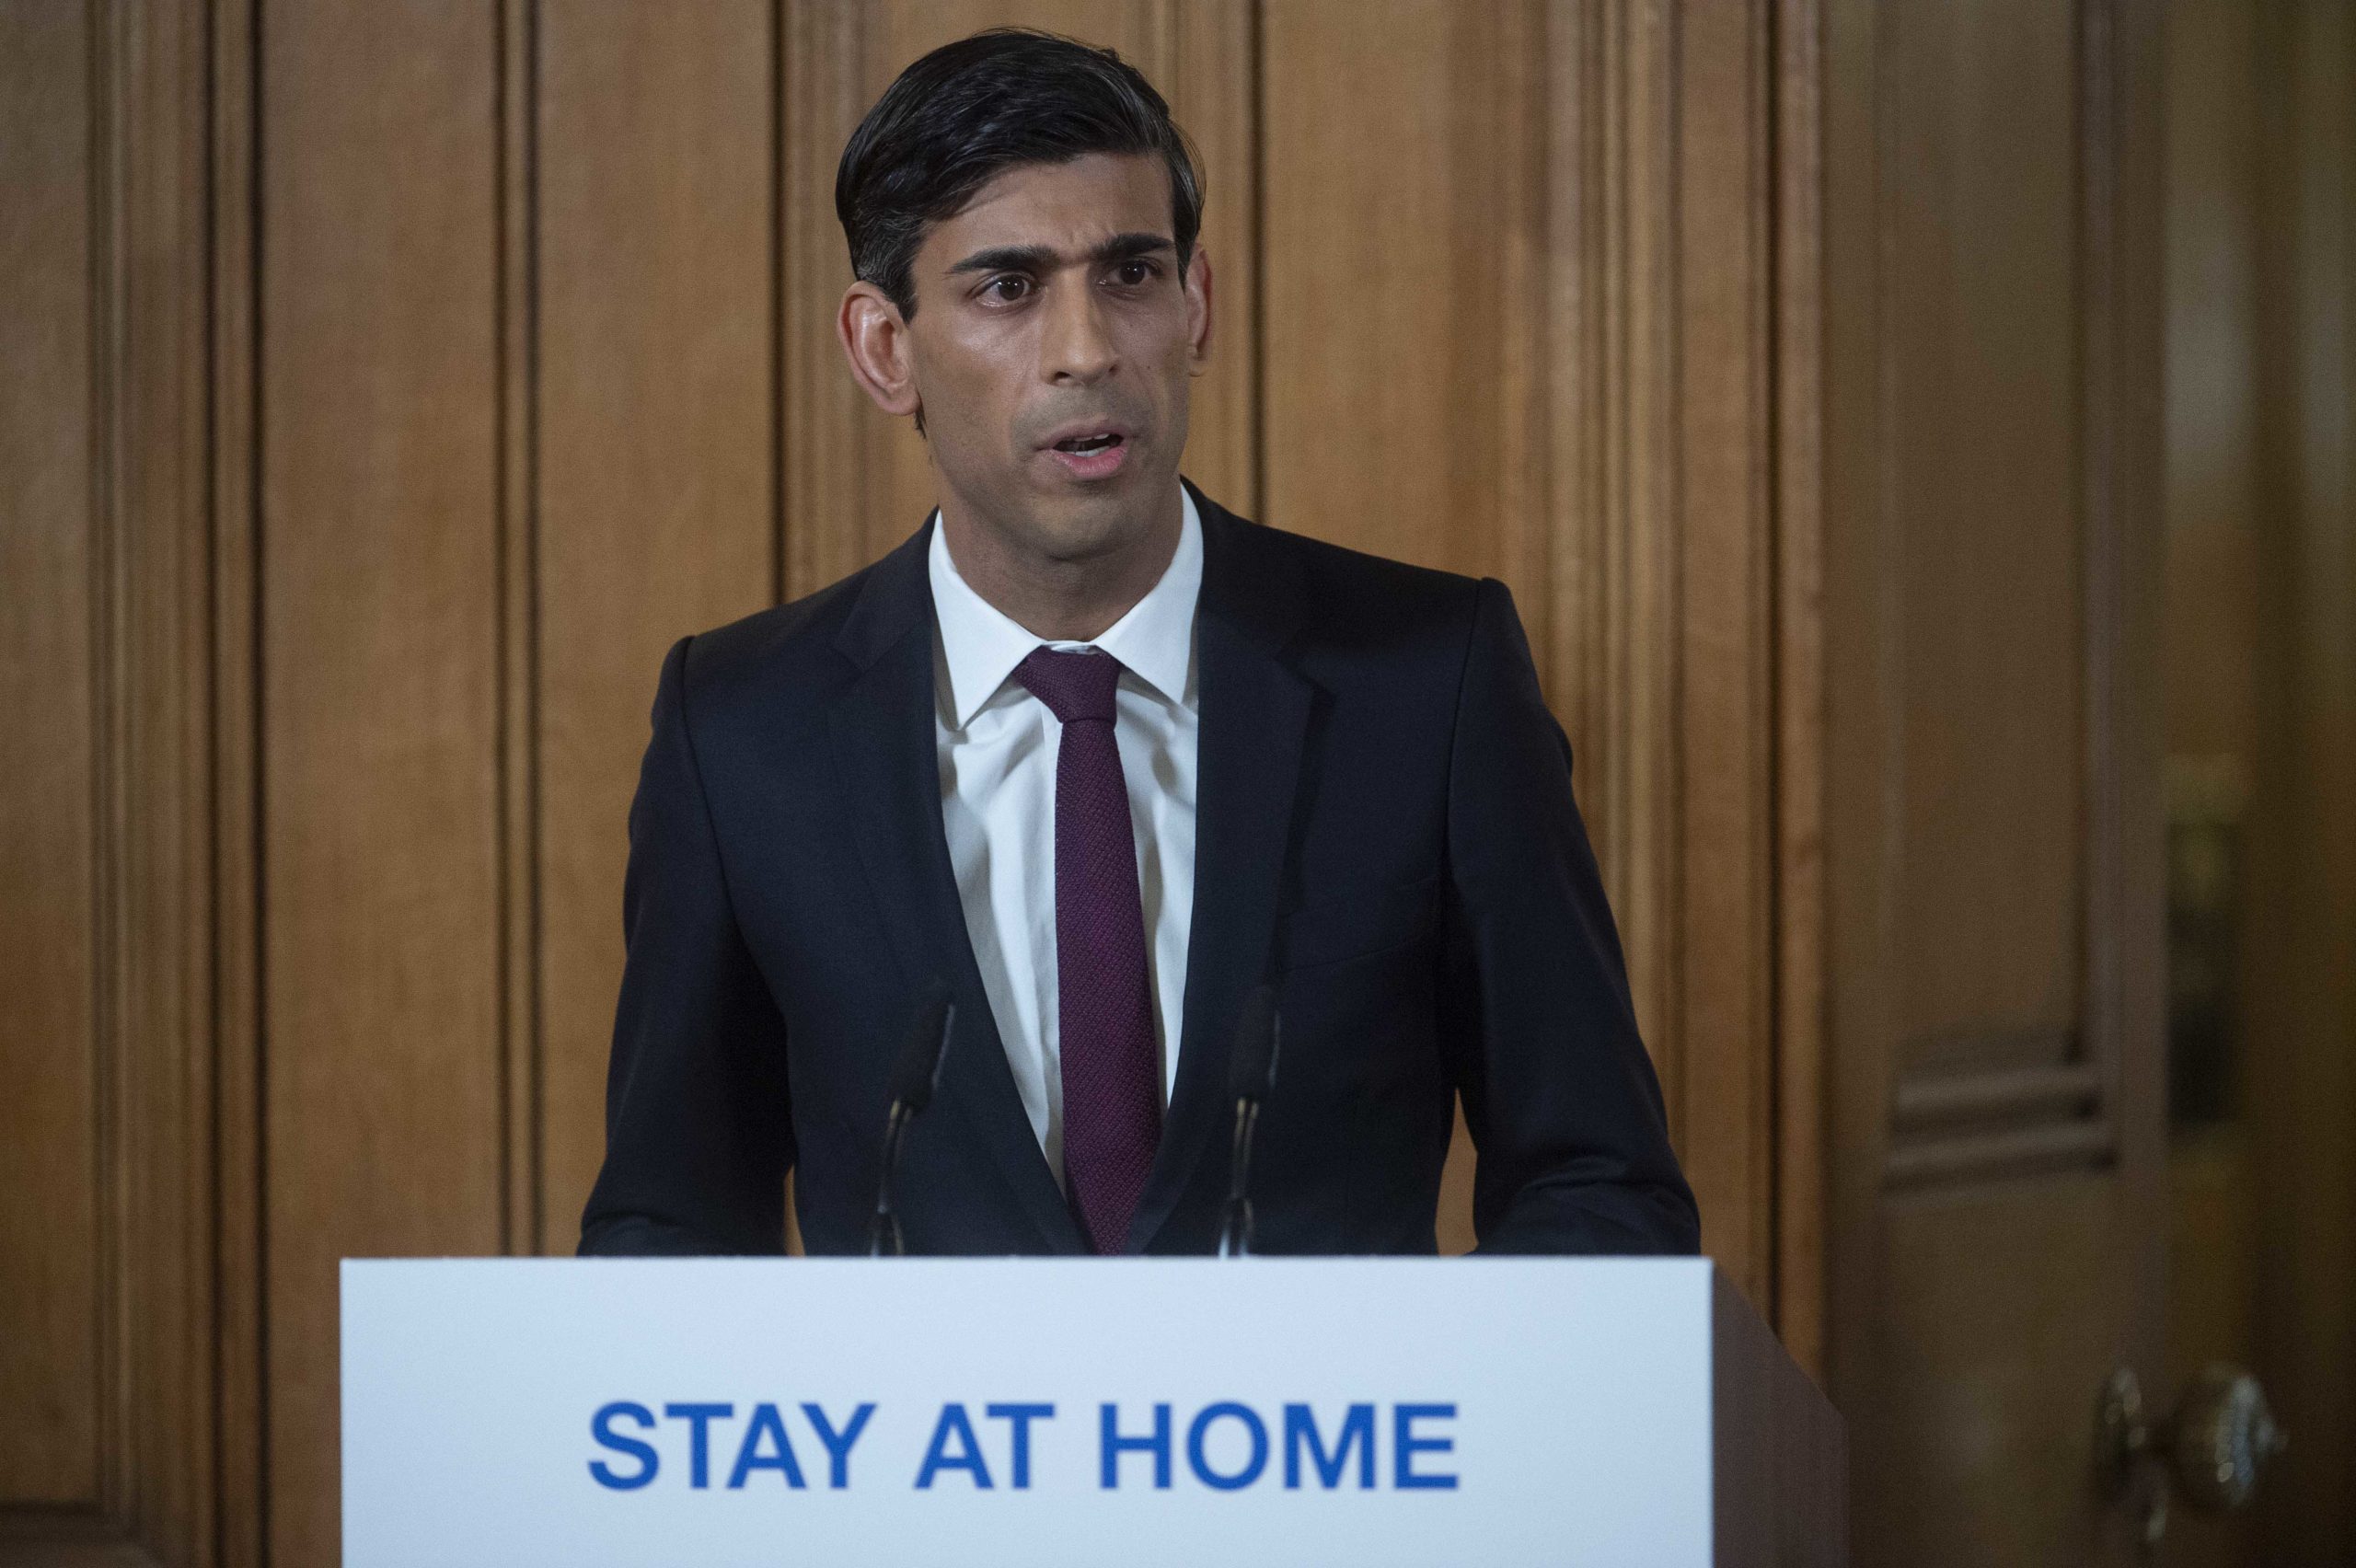 Chancellor Rishi Sunak speaks from the Downing Street podium on March 20. (Getty Images)